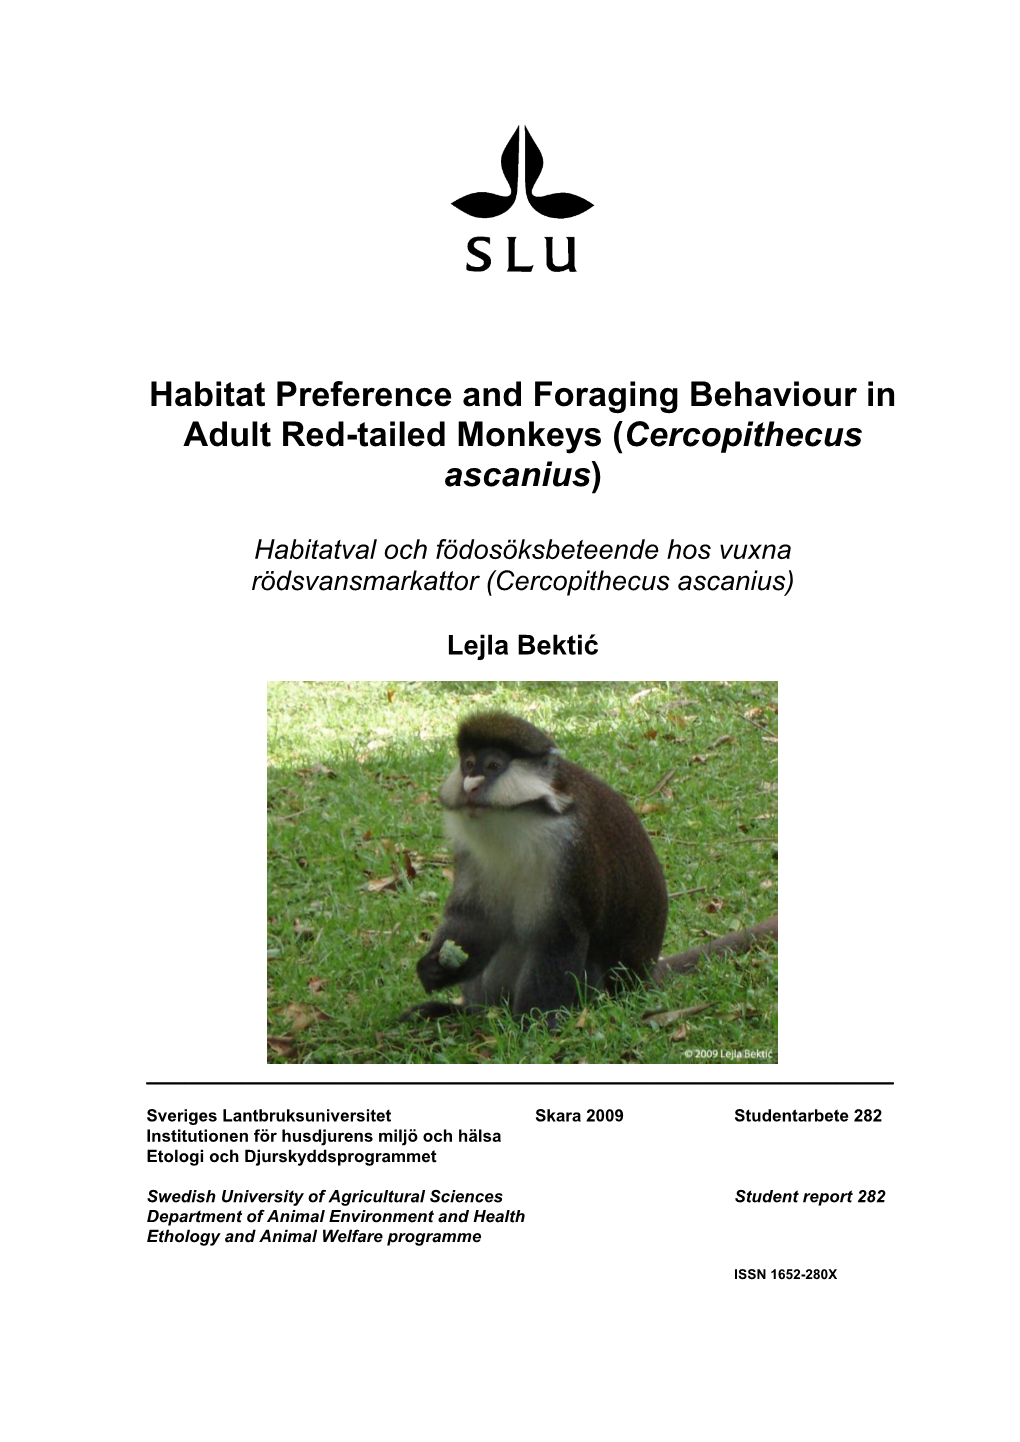 Habitat Preference and Foraging Behaviour in Adult Red-Tailed Monkeys (Cercopithecus Ascanius)